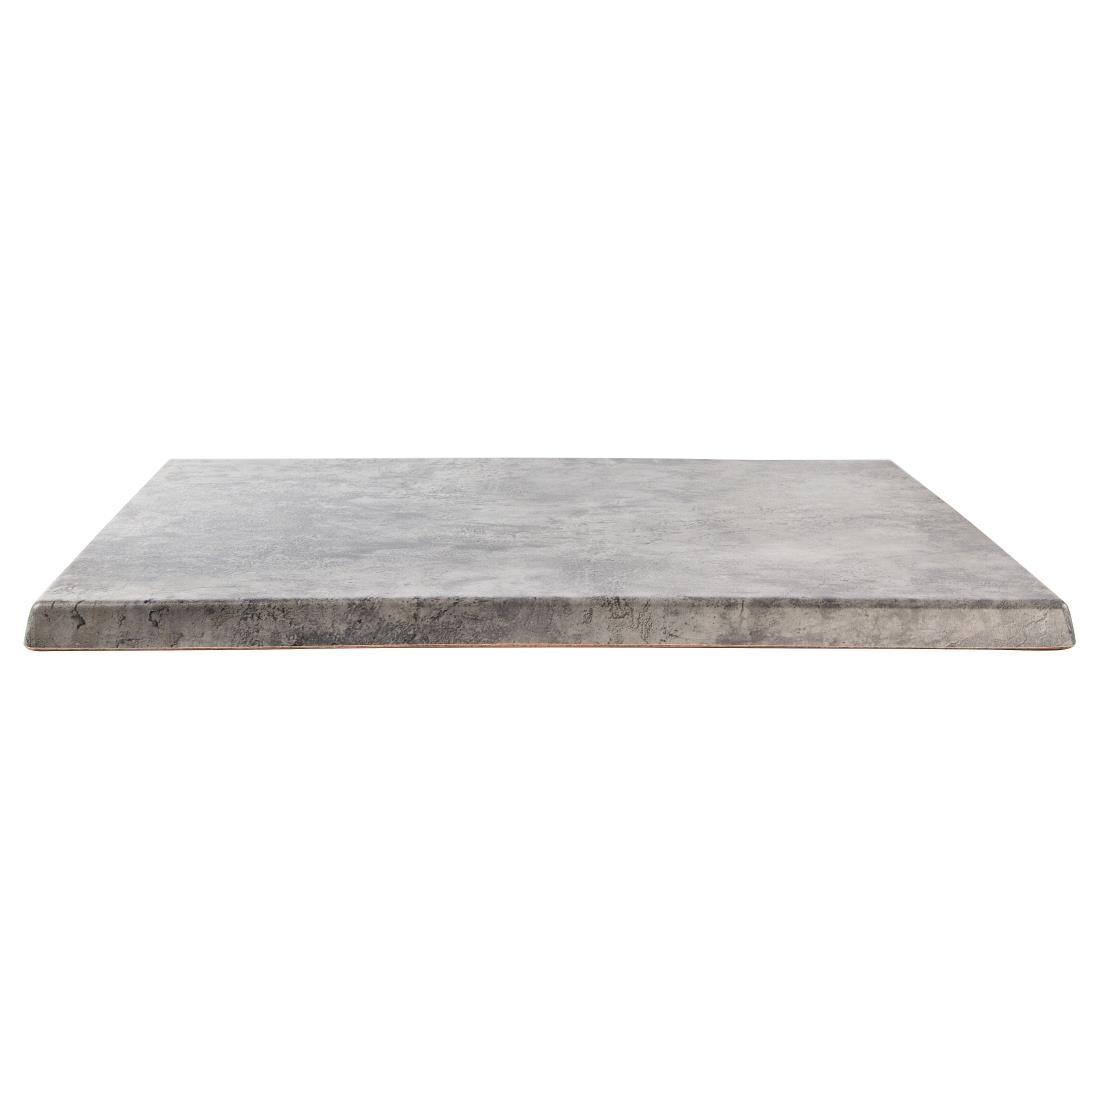 Werzalit Pre-drilled Square Table Top  Concrete 600mm - GM422  - 4